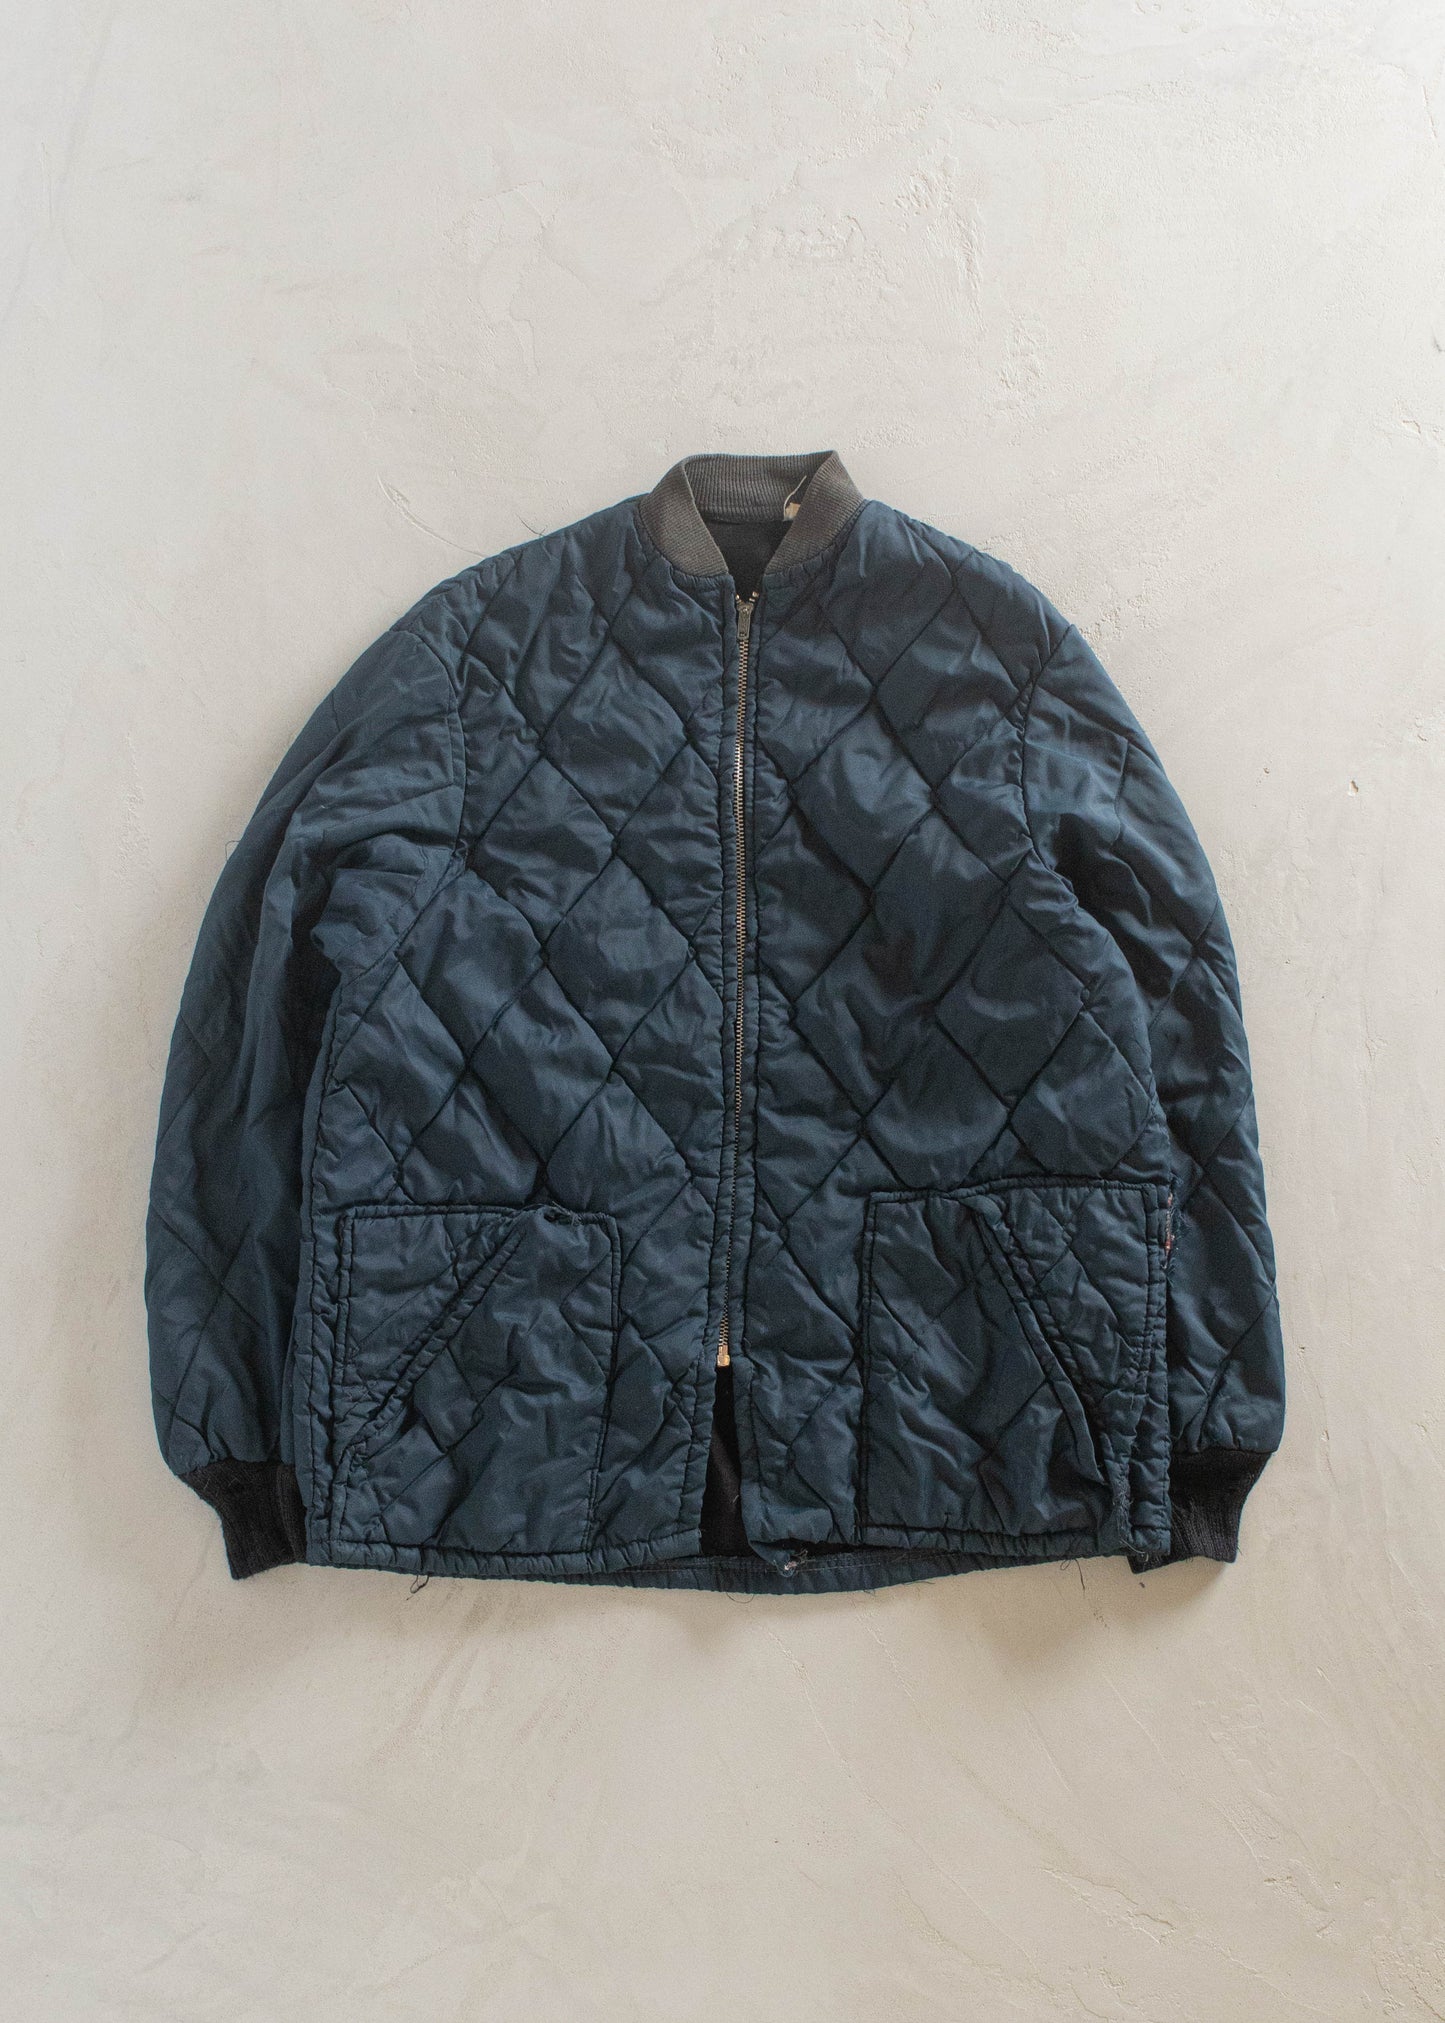 1980s Quilted Liner Jacket Size XS/S